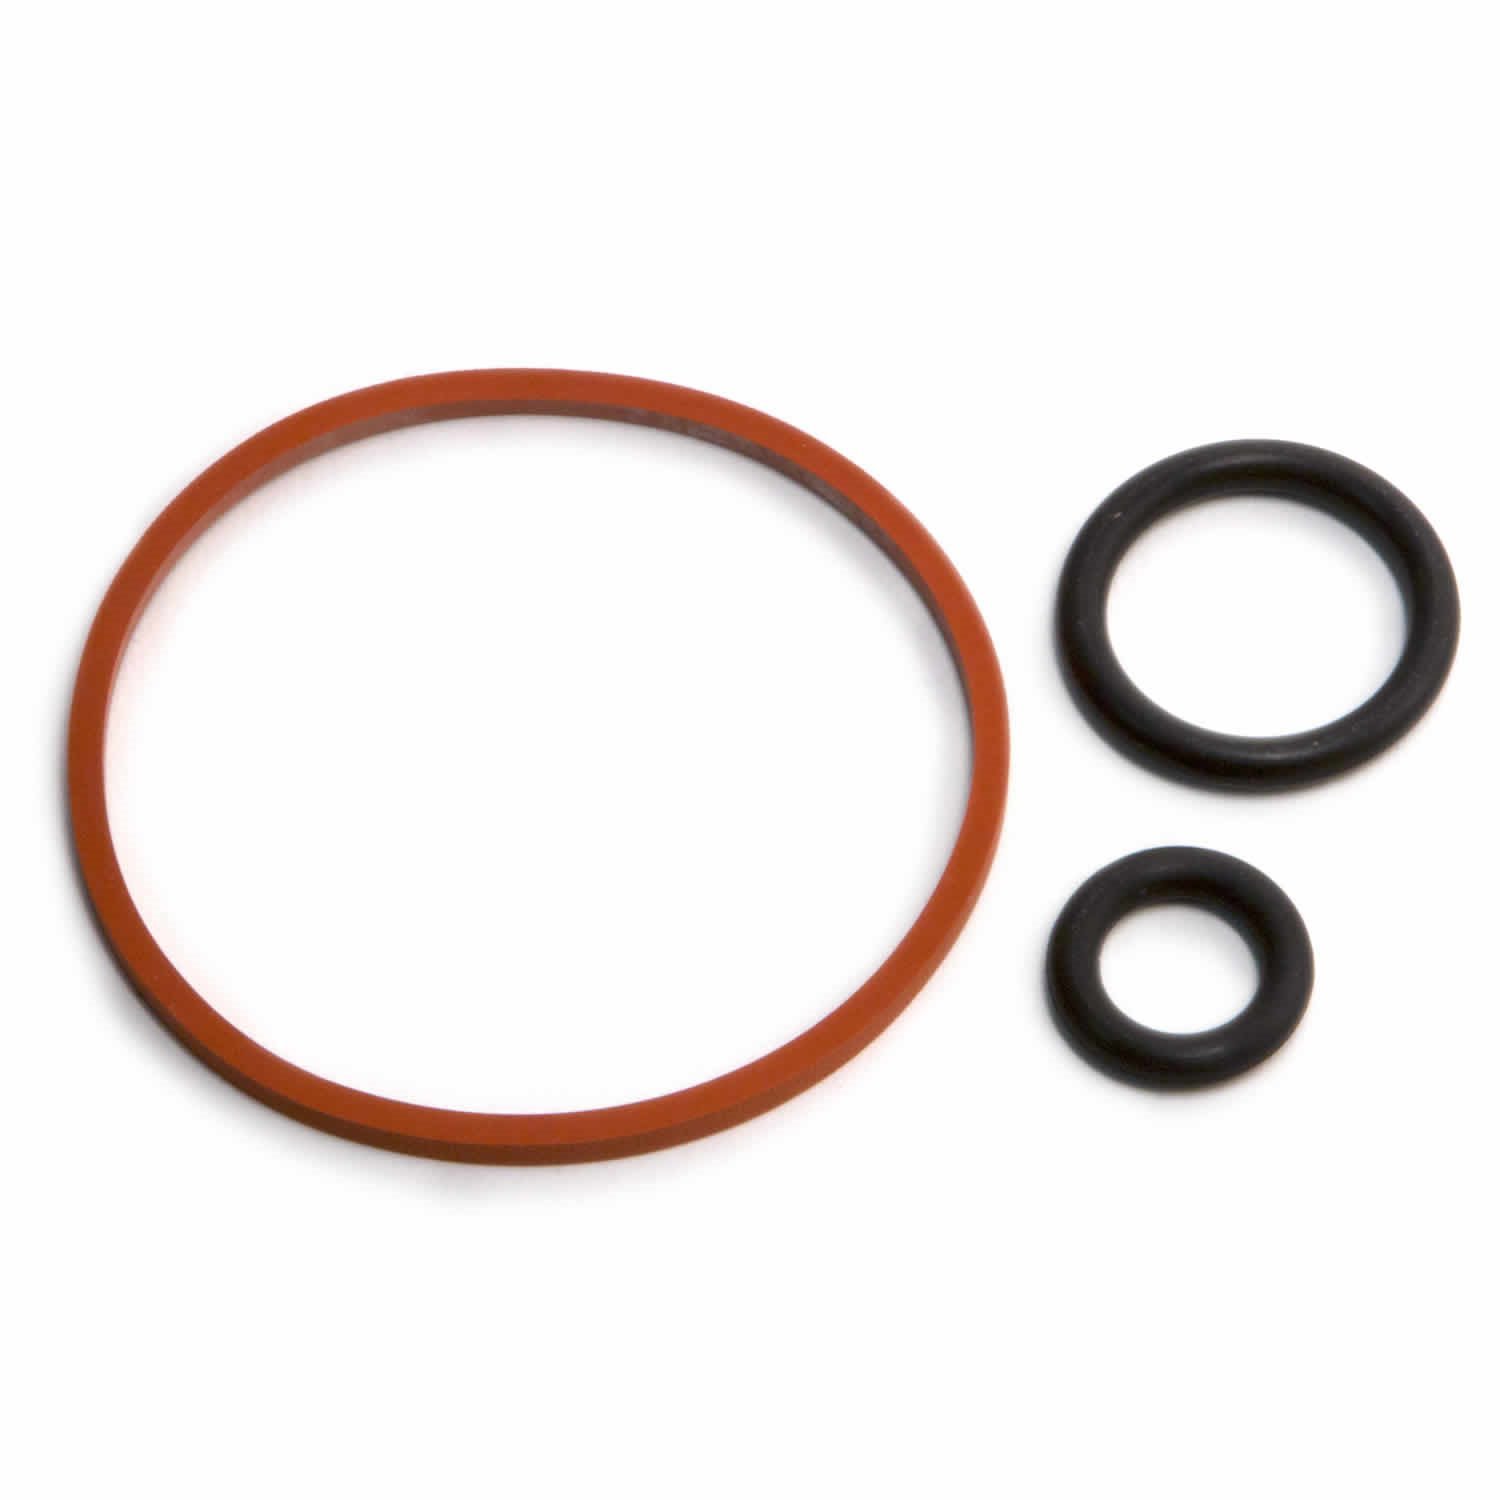 Turbine Housing O-Ring Replacement Kit 1994-97 Ford 7.3L